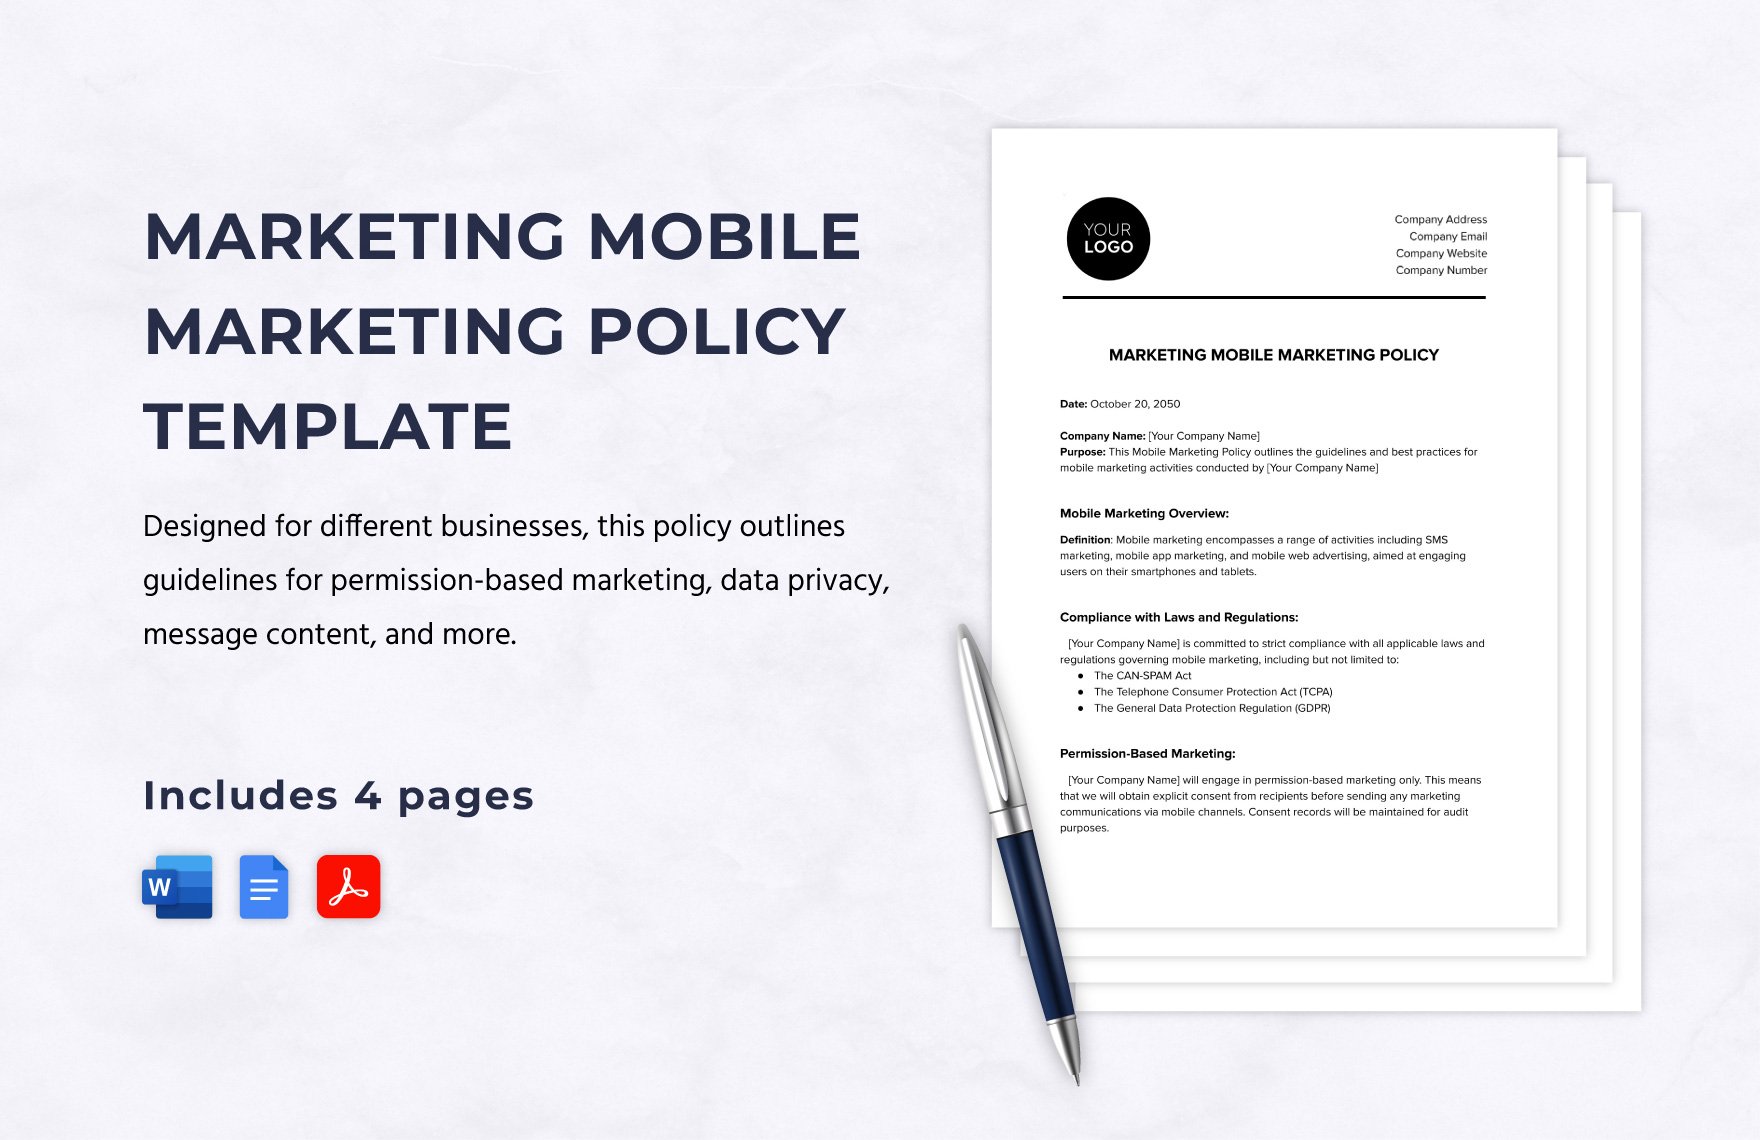 Marketing Mobile Marketing Policy Template in Word, Google Docs, PDF